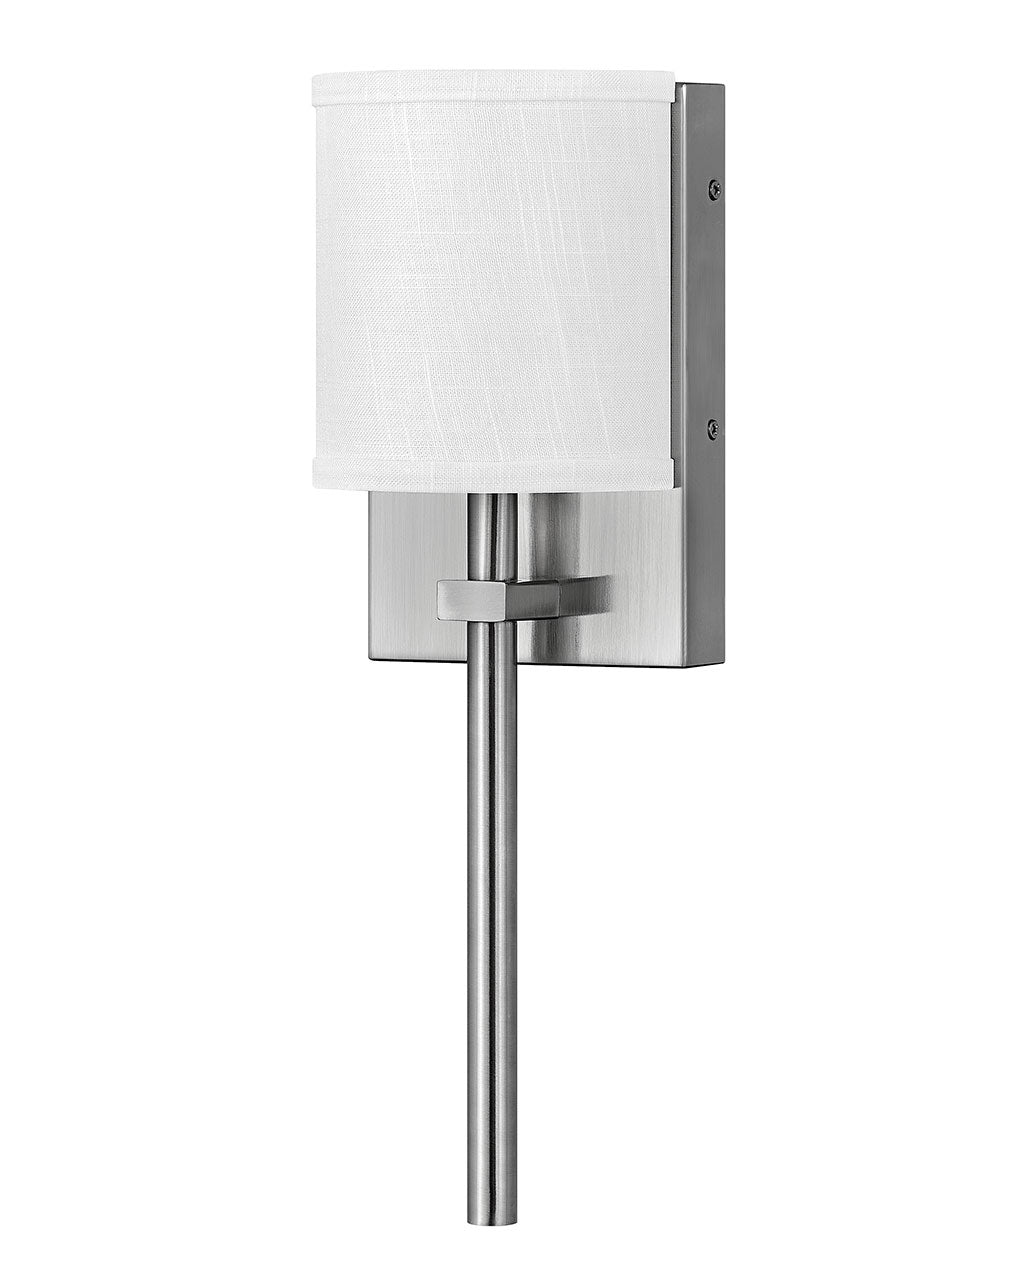 Hinkley - 41010BN - LED Wall Sconce - Avenue Off White - Brushed Nickel